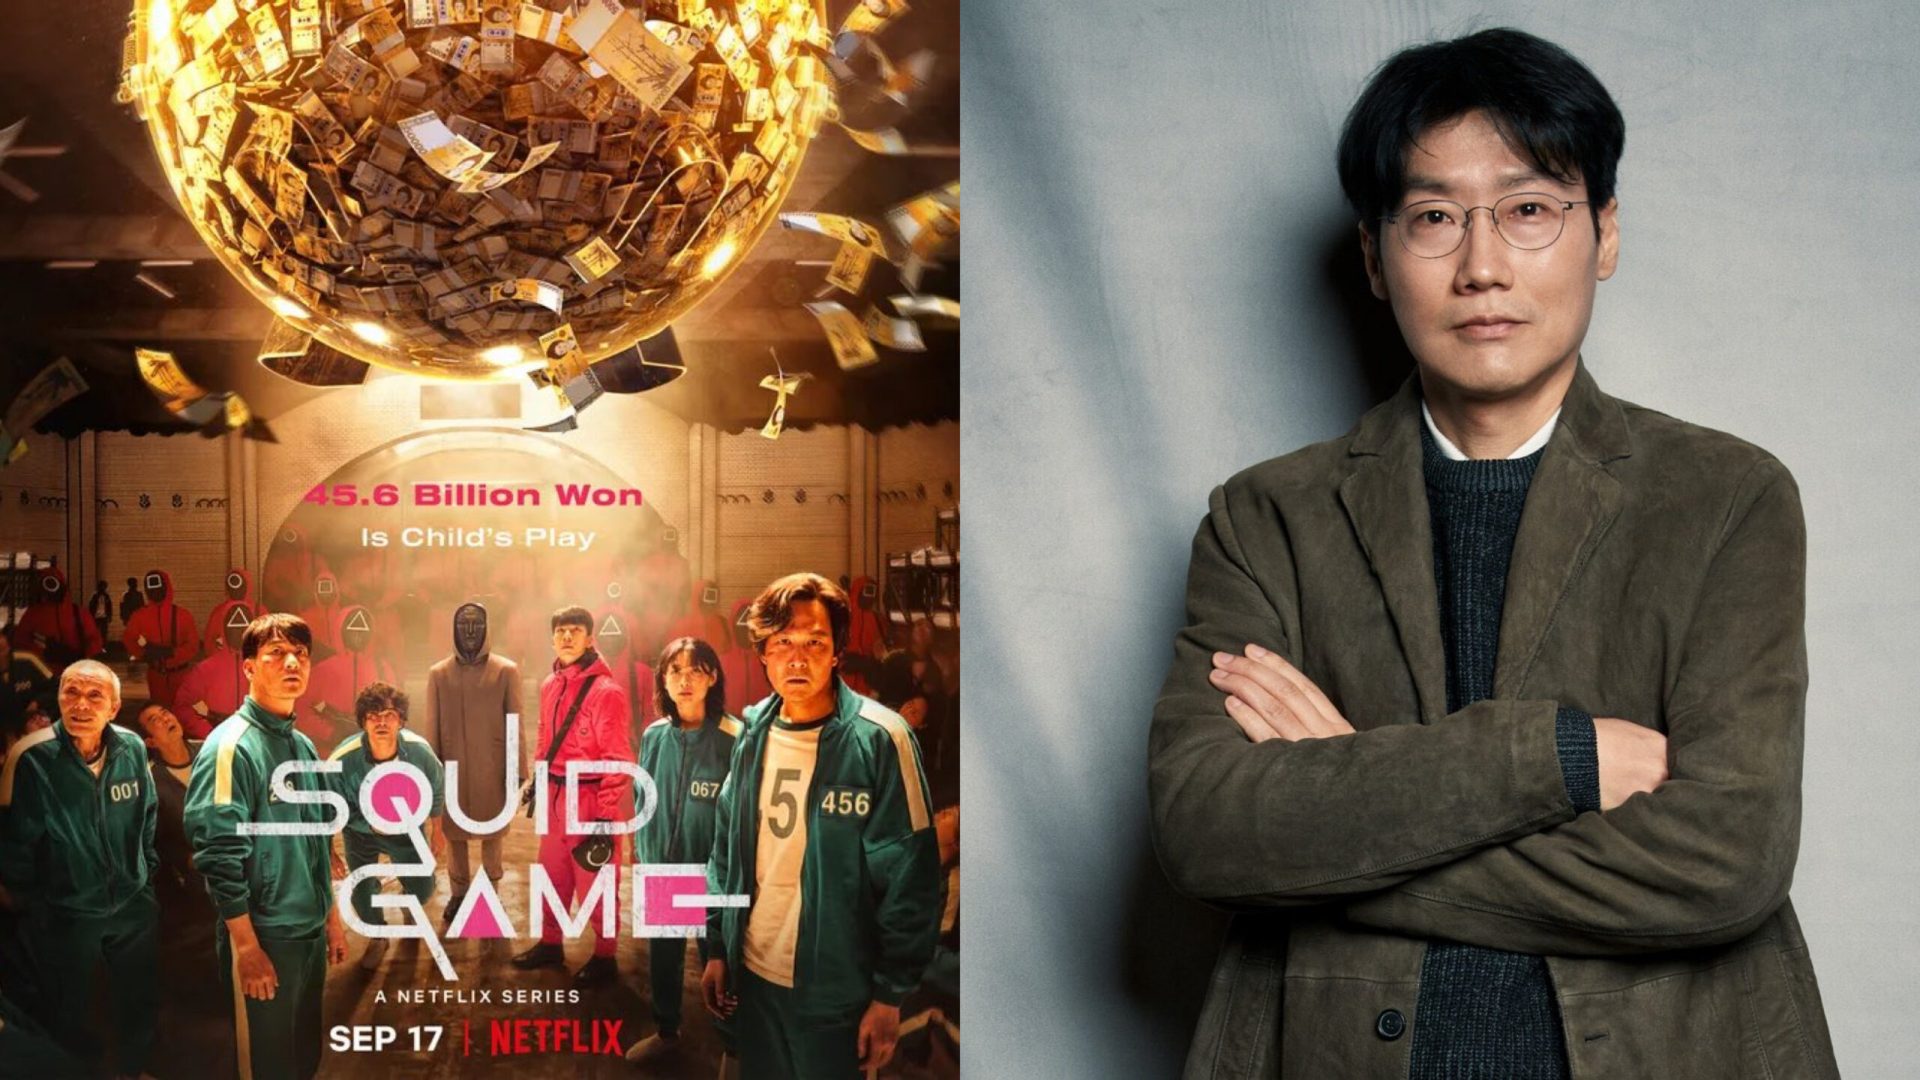 Squid Game: How Director Hwang Dong-hyuk work was rejected for 10 years & had to sell his laptop due to hardship